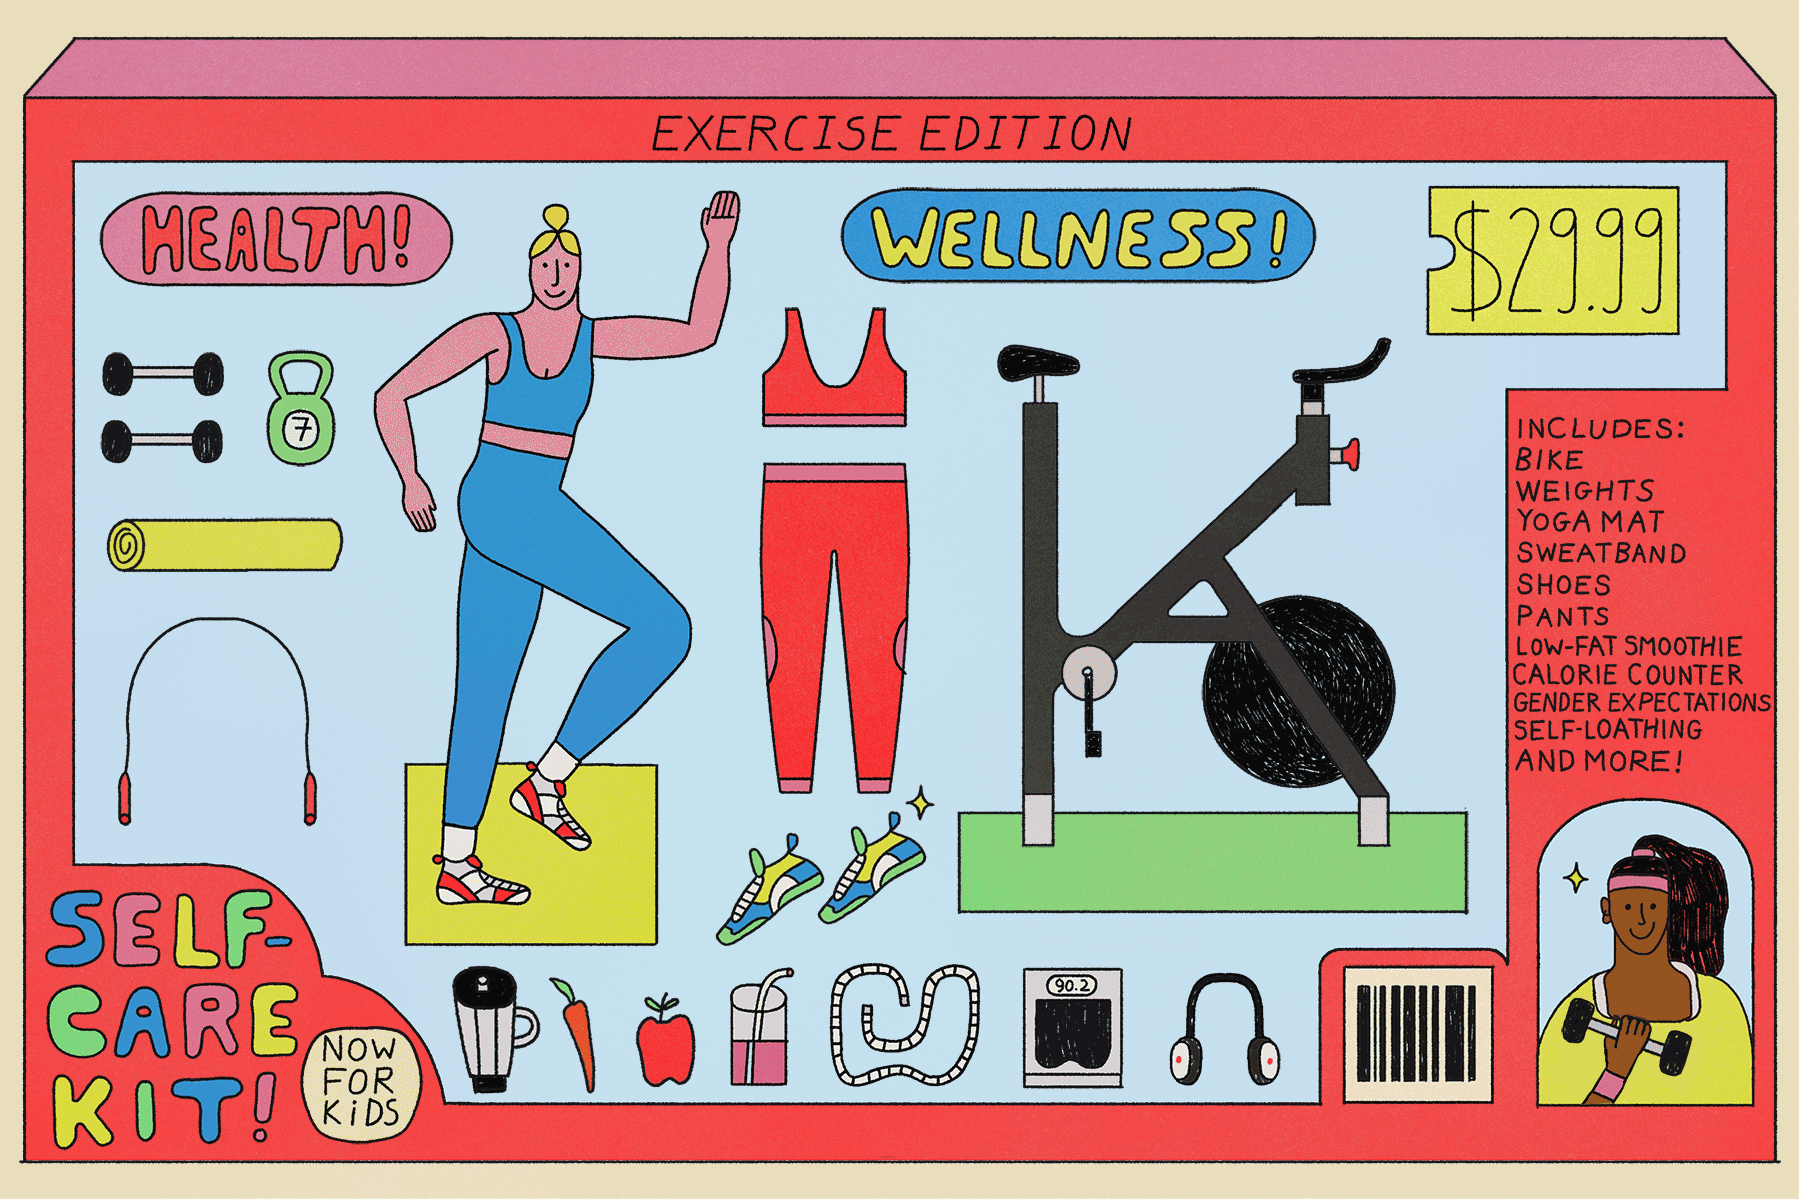 Illustration of a "self-care kit" that includes a Peloton, exercise Barbie and workout gear 